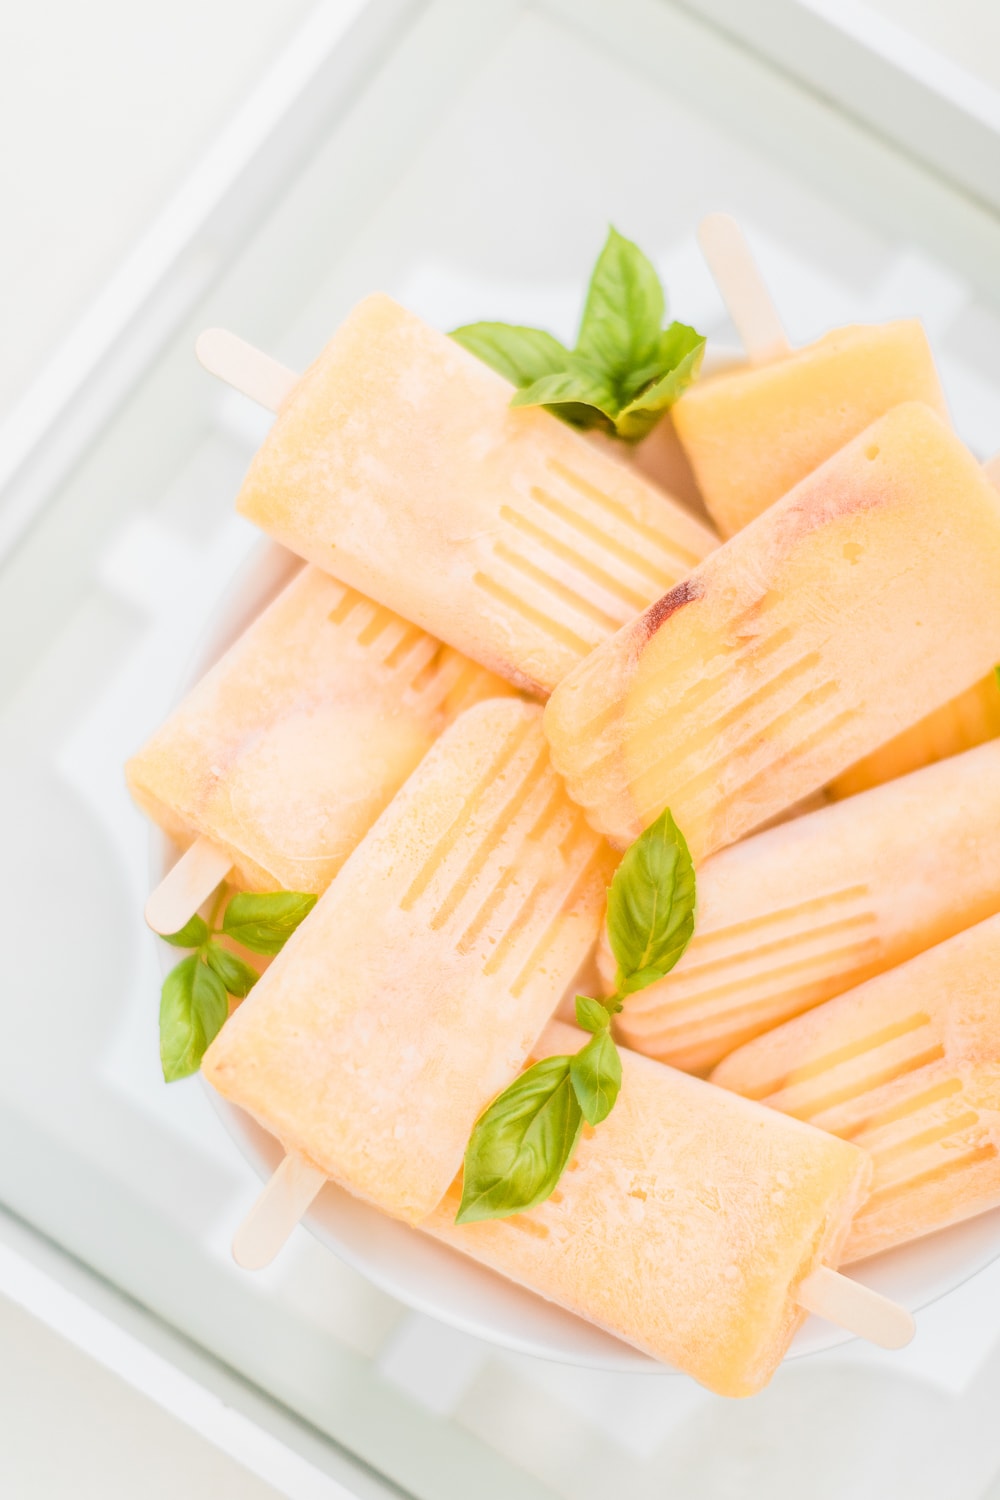 Southern lifestyle blogger Stephanie Ziajka shares a refreshing champagne popsicle recipe on Diary of a Debutante